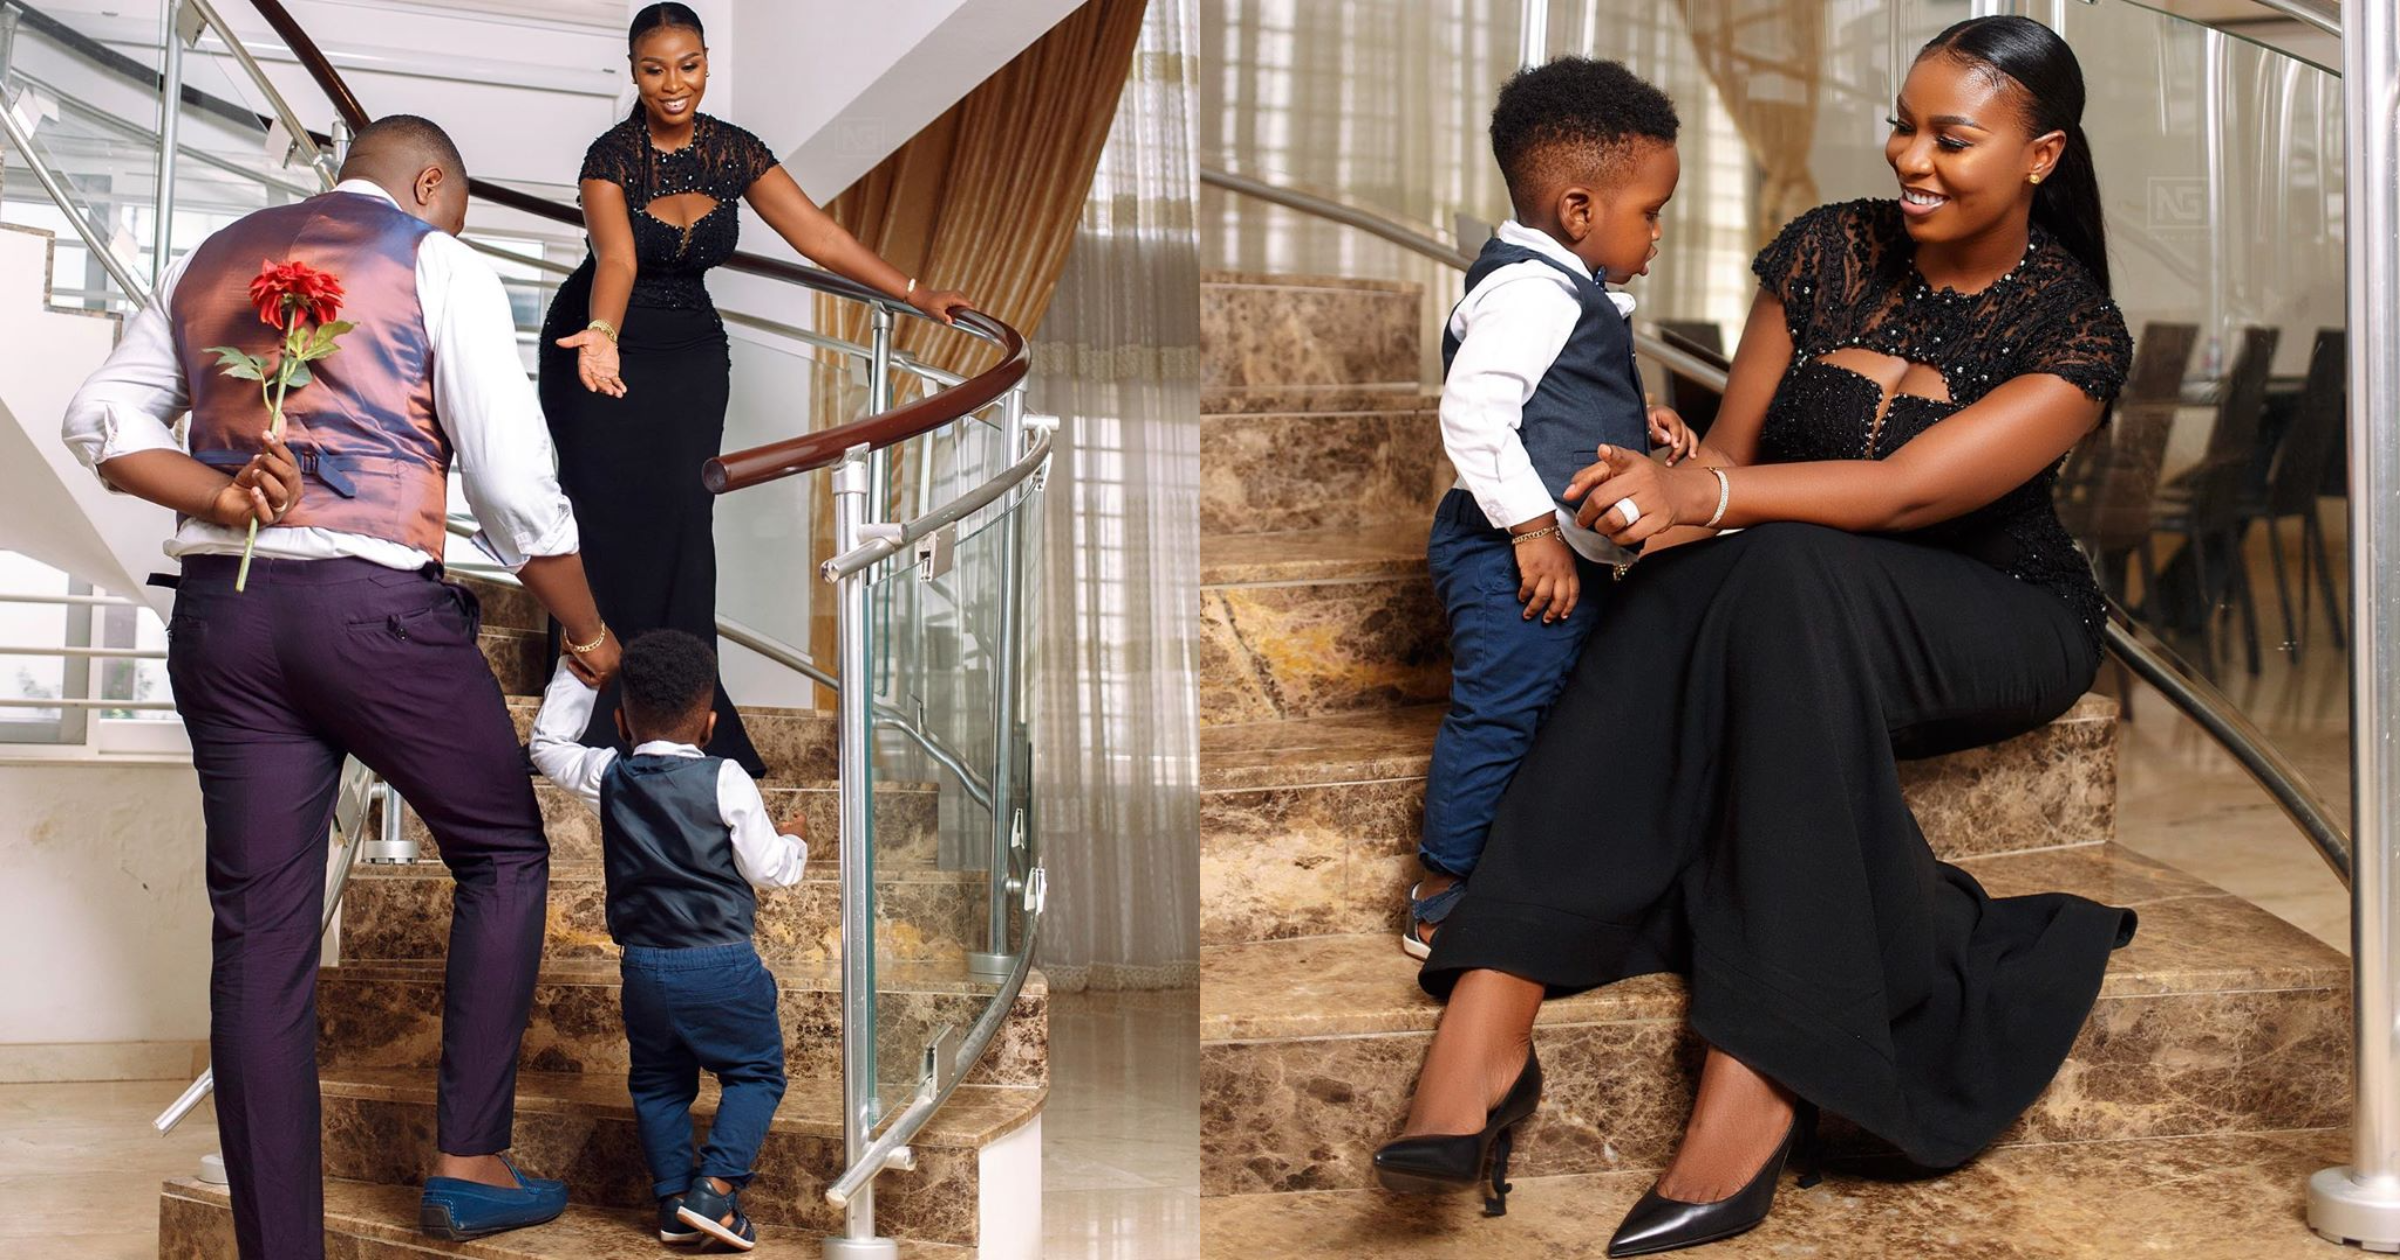 John Dumelo and wife celebrate 2nd birthday of their son John Junior (photo)